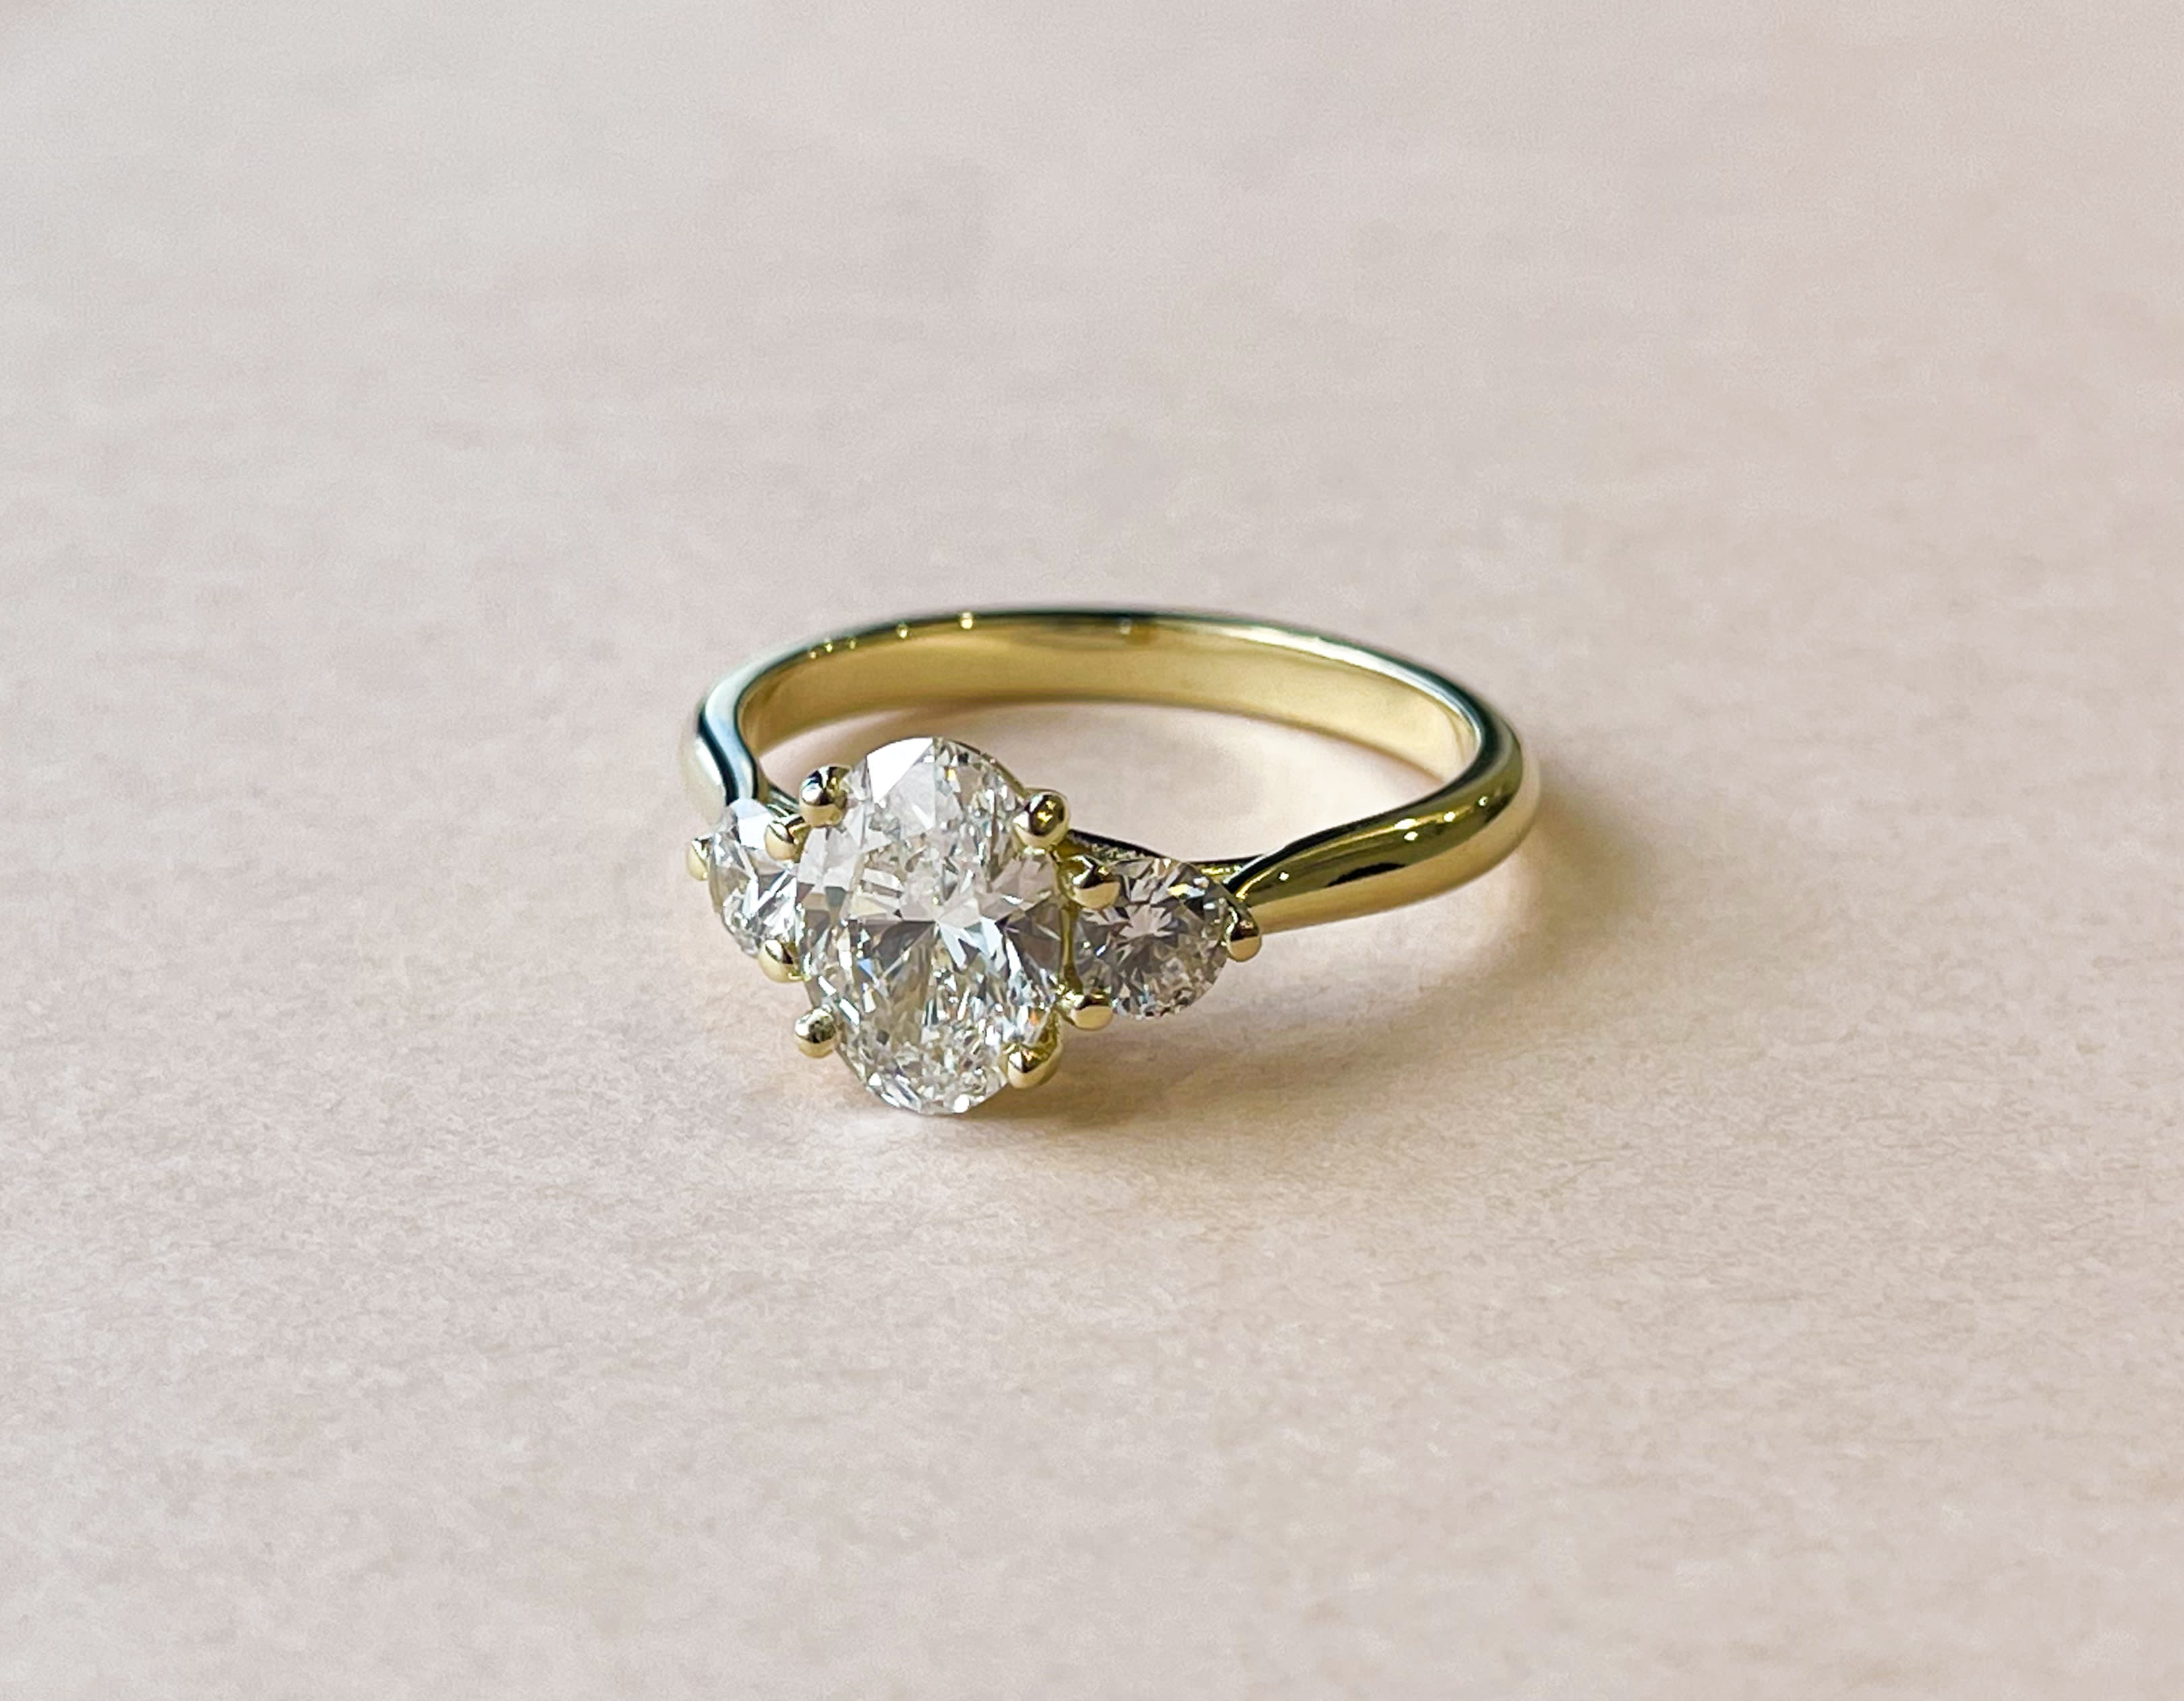 3 stone engagement ring featuring an oval centre stone and accenting round cut diamonds